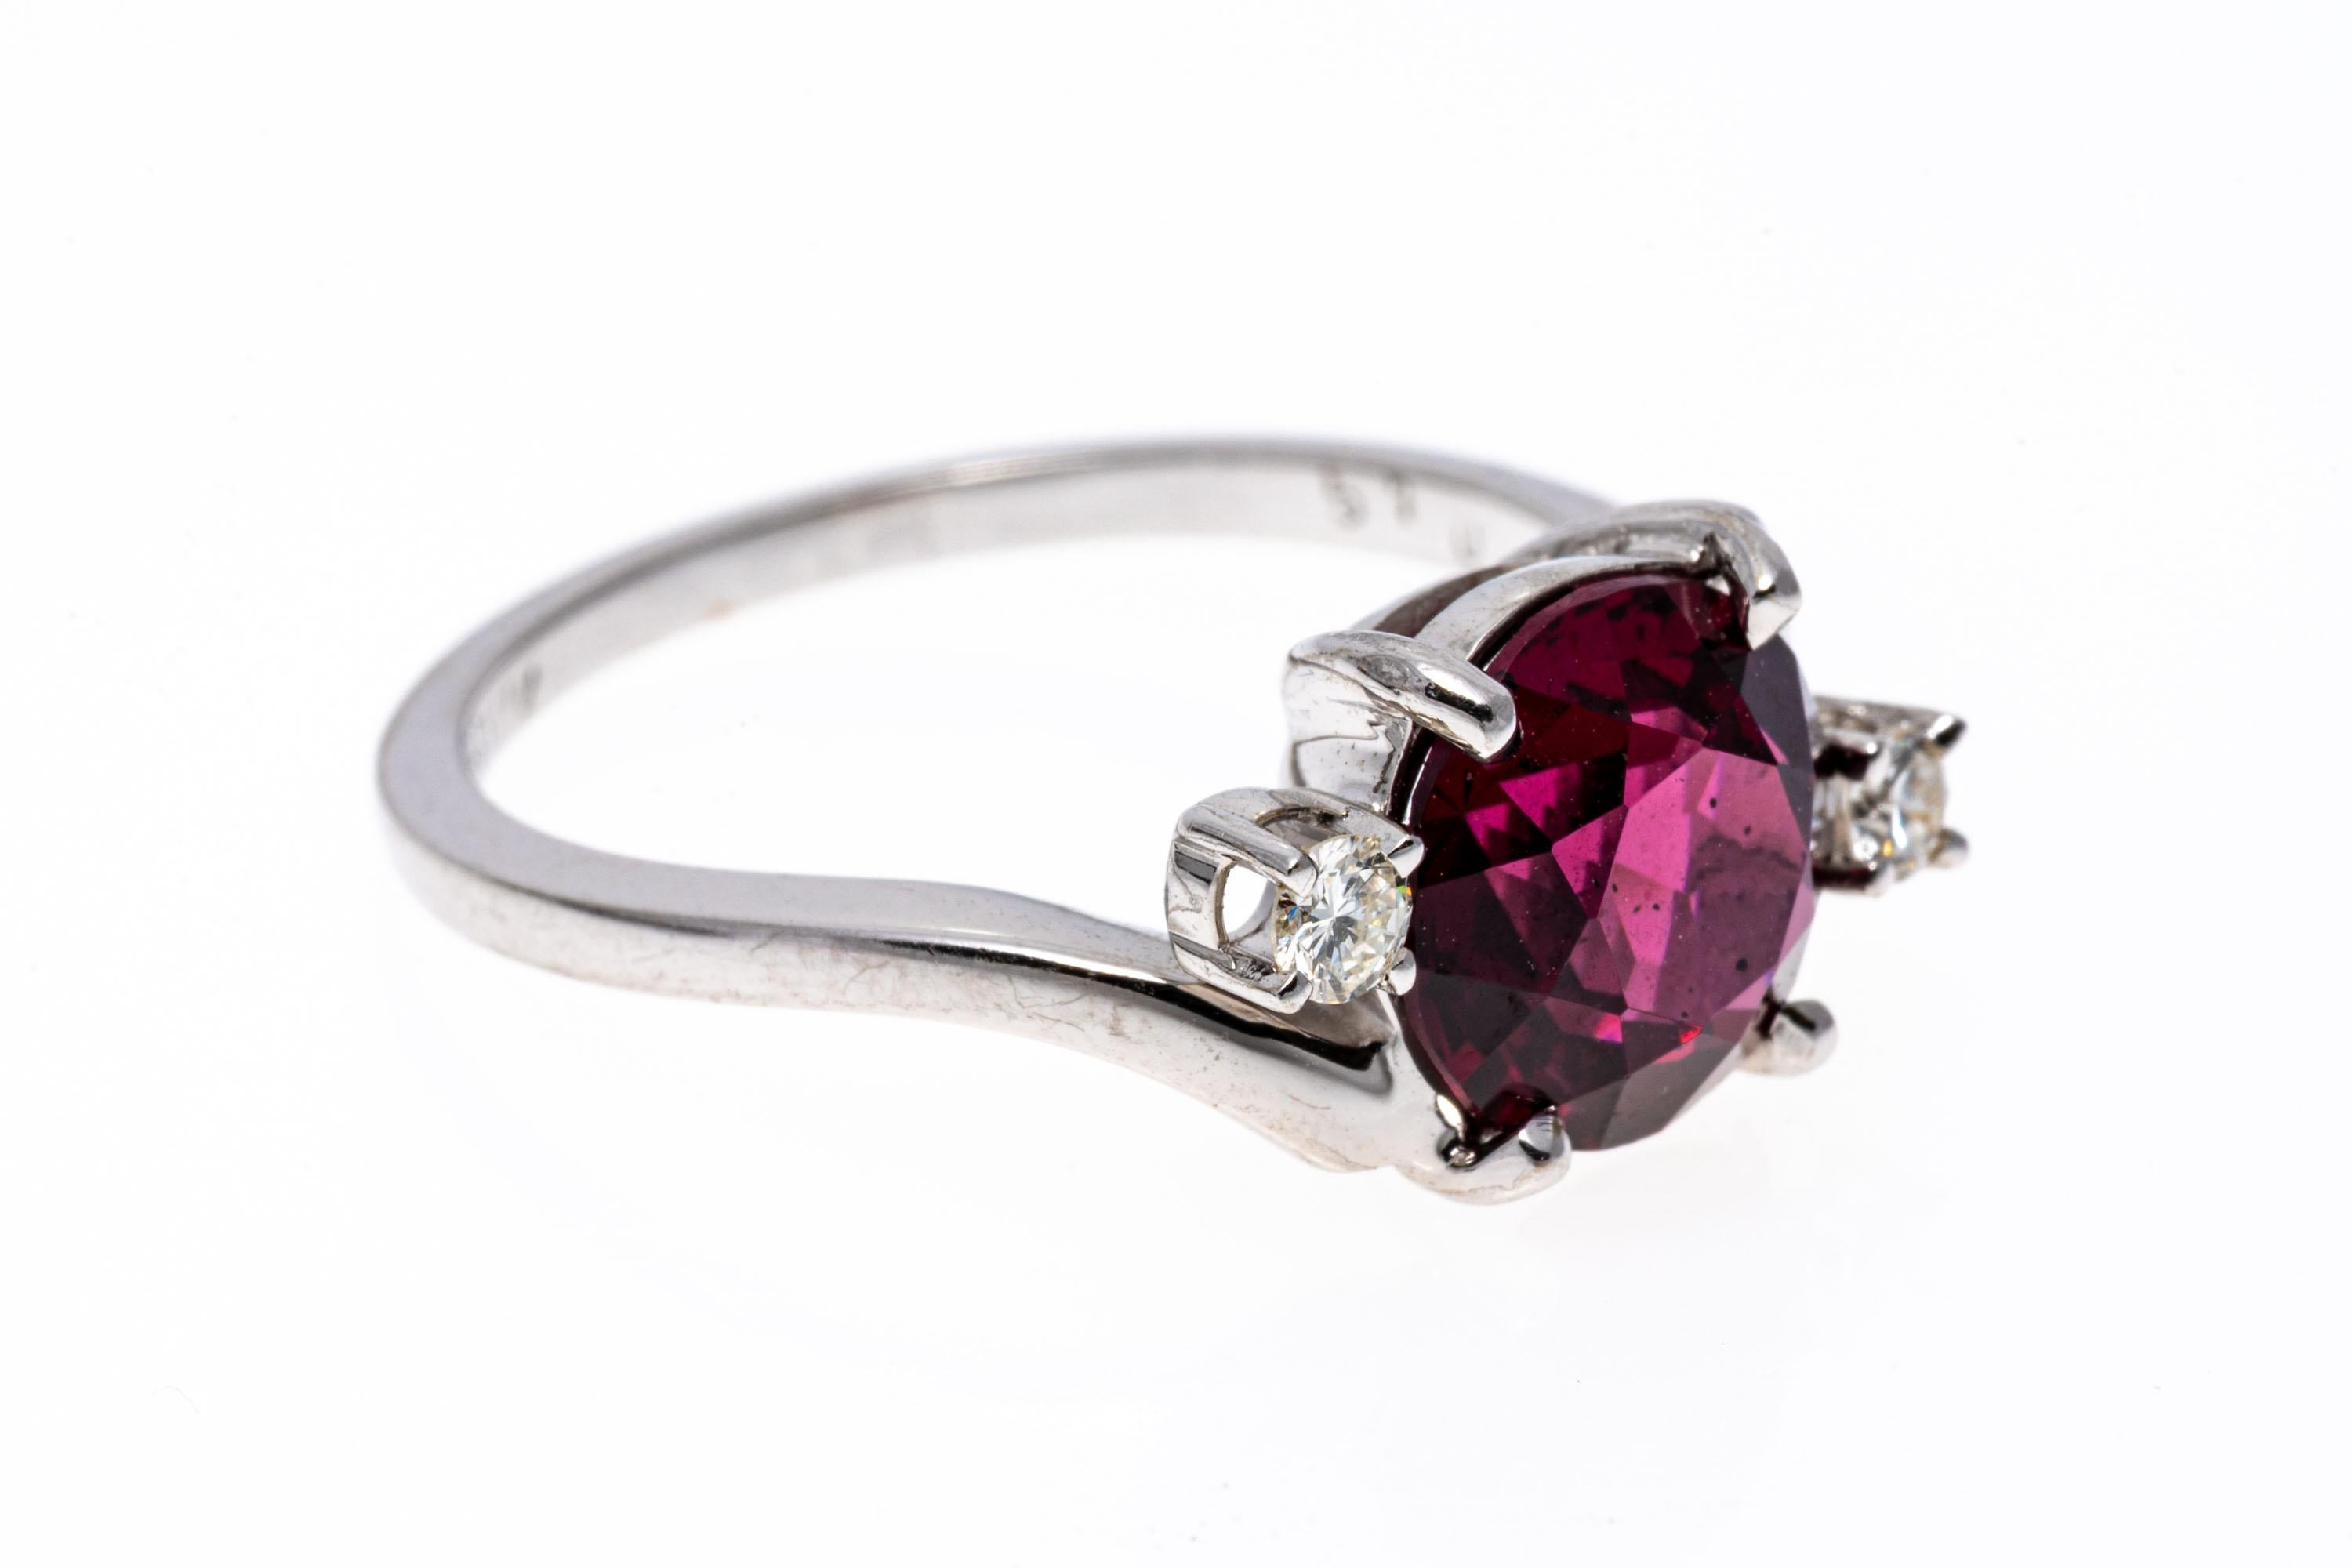 14k white gold ring. This pretty white gold bypass style ring is set with a center round faceted, purplish red color rhodolite garnet, approximately 2.26 CTS, prong set. The garnet is flanked with offset round faceted diamonds, approximately 0.08